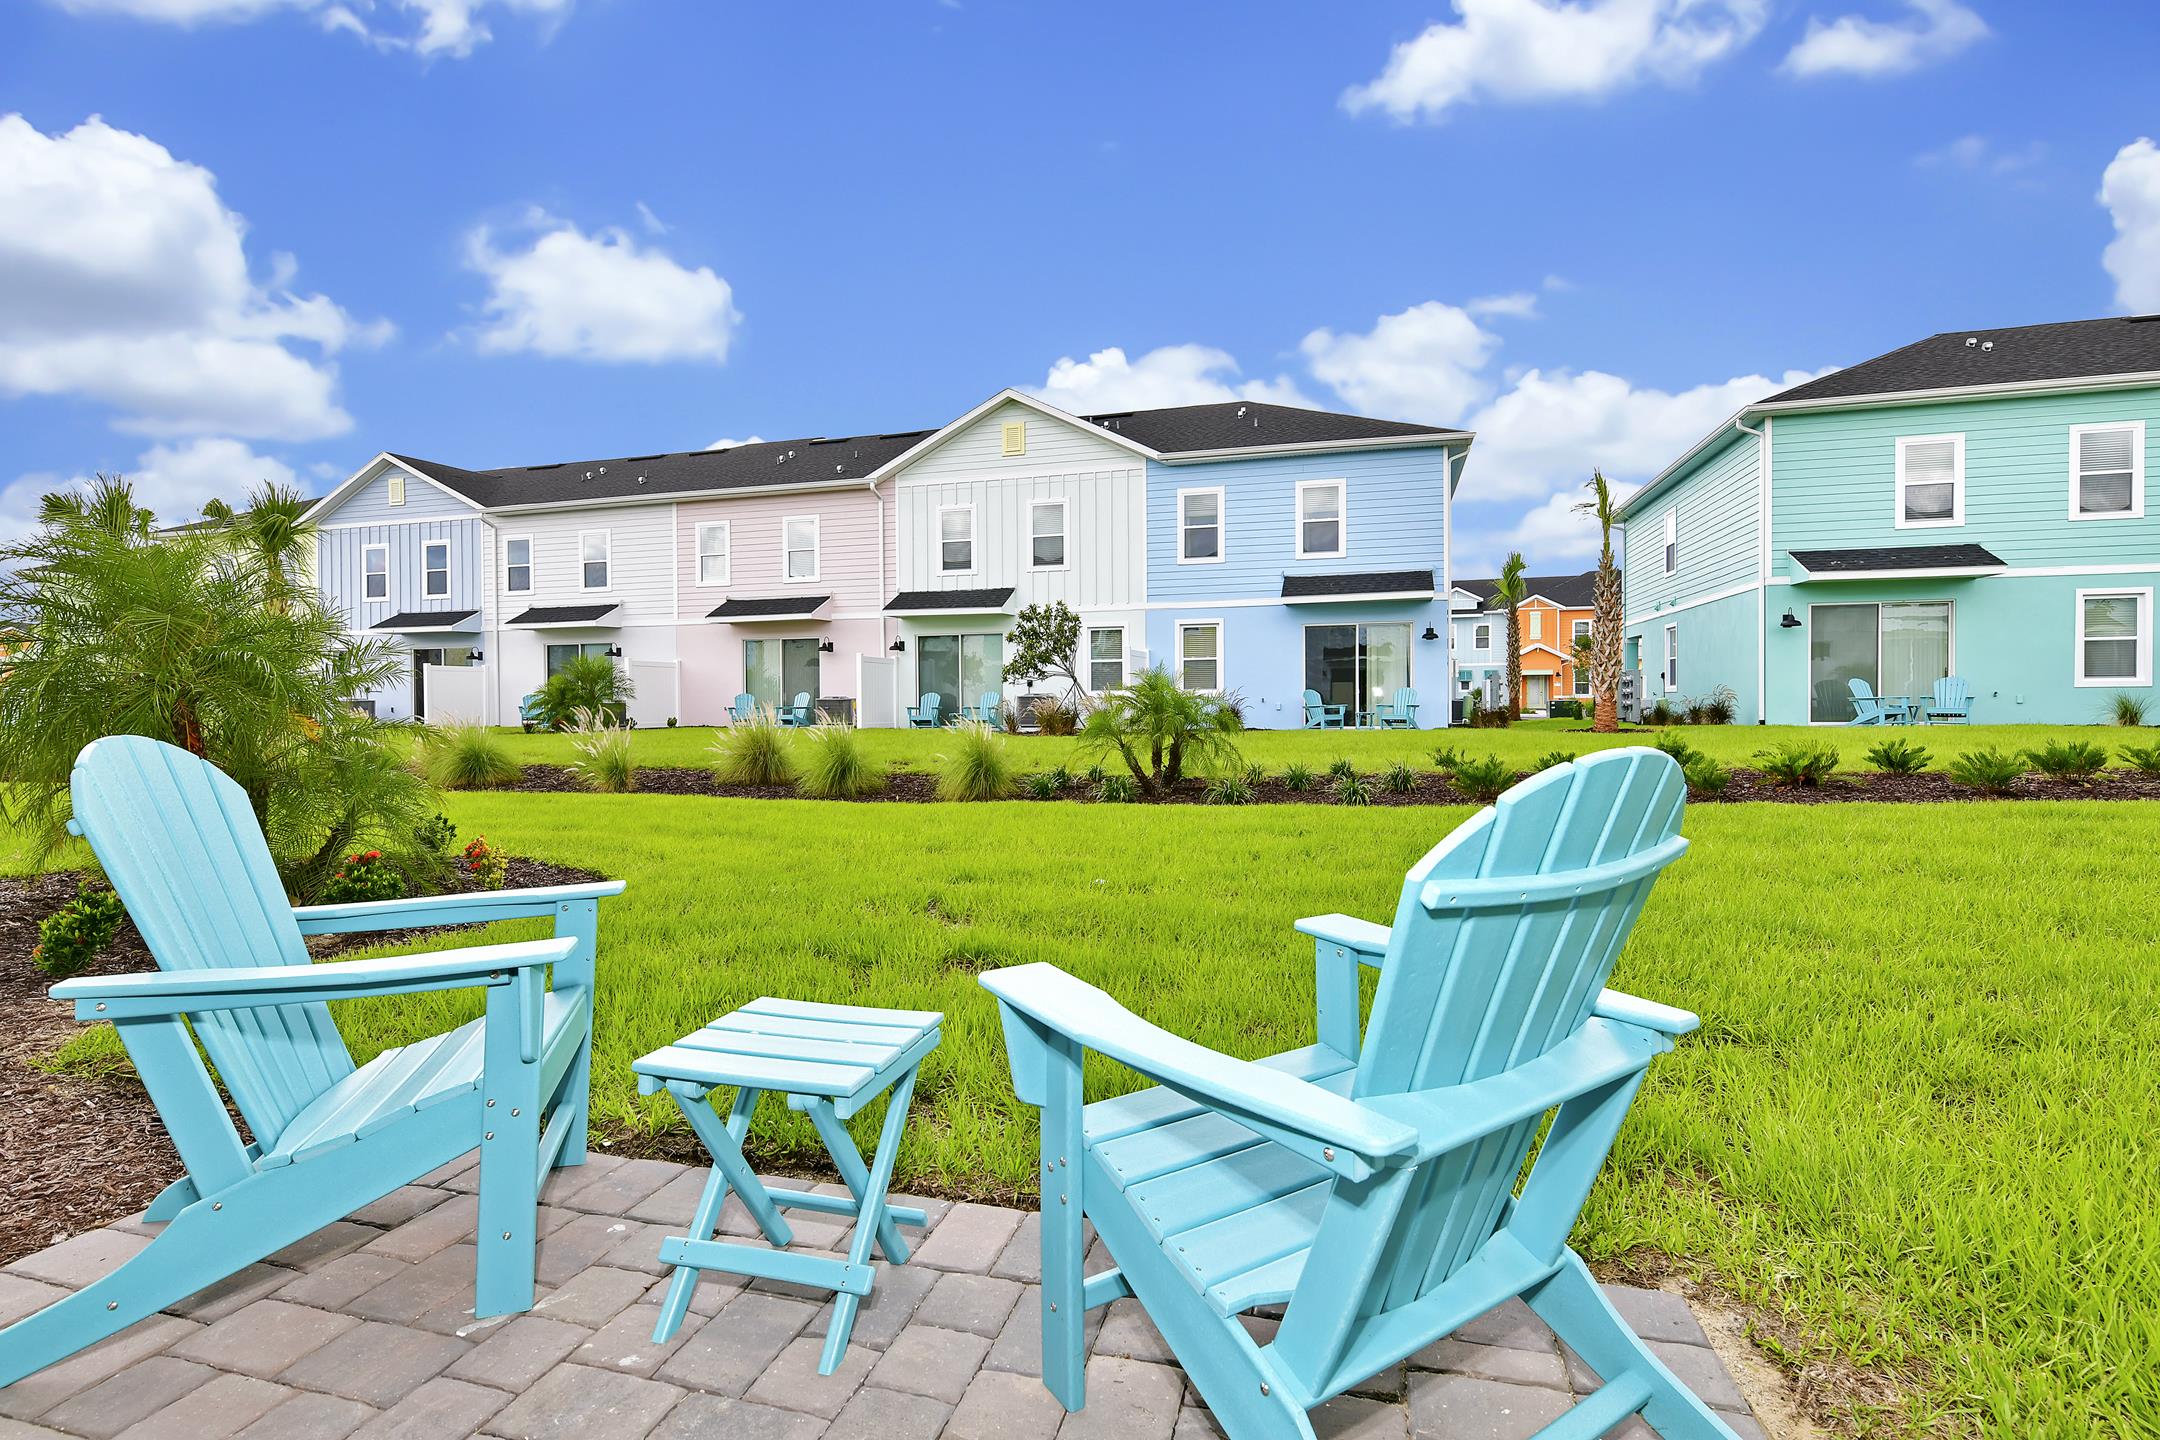 Property Image 2 - Cool Cottage near Disney with Margaritaville Resort Access - 3184CS